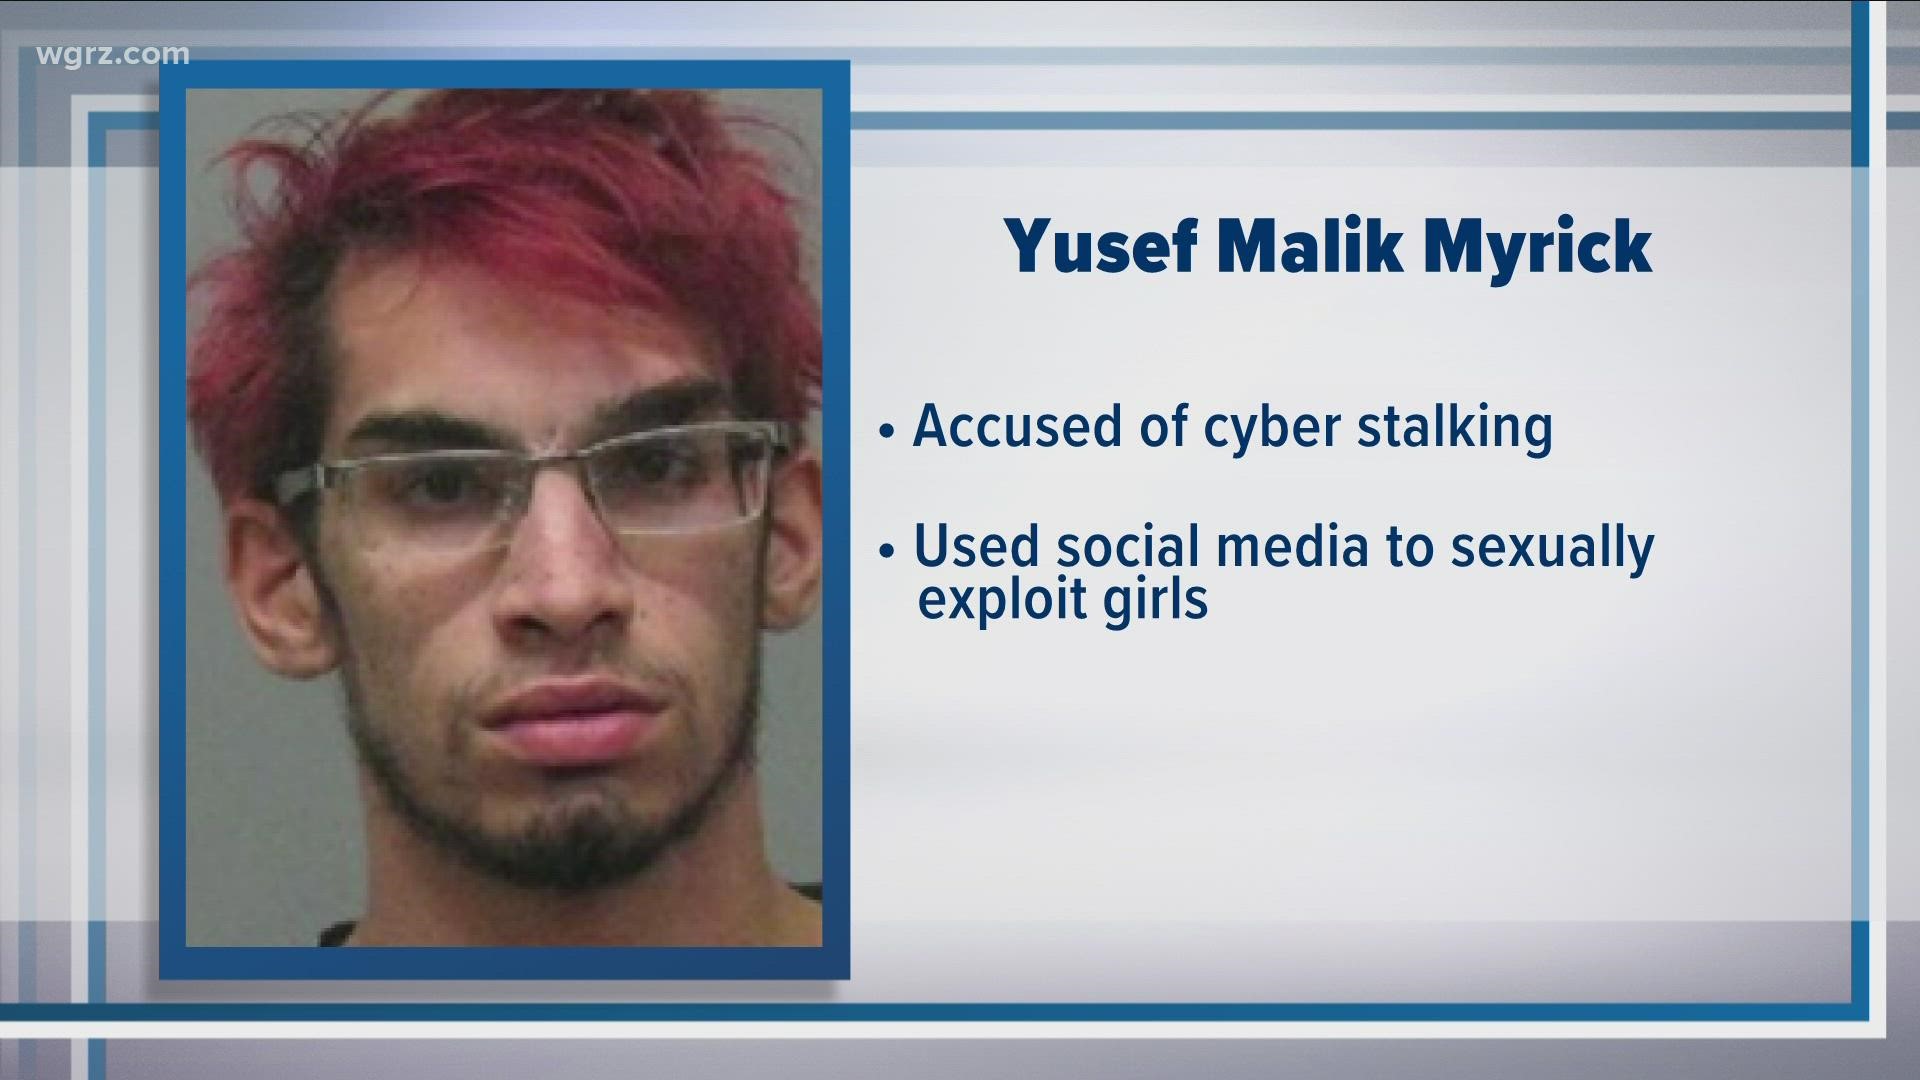 US Attorney's office says Yusef Malik Myrick engaged in online sexual relationships with girls. He is accused of stalking and threatening them and their families.